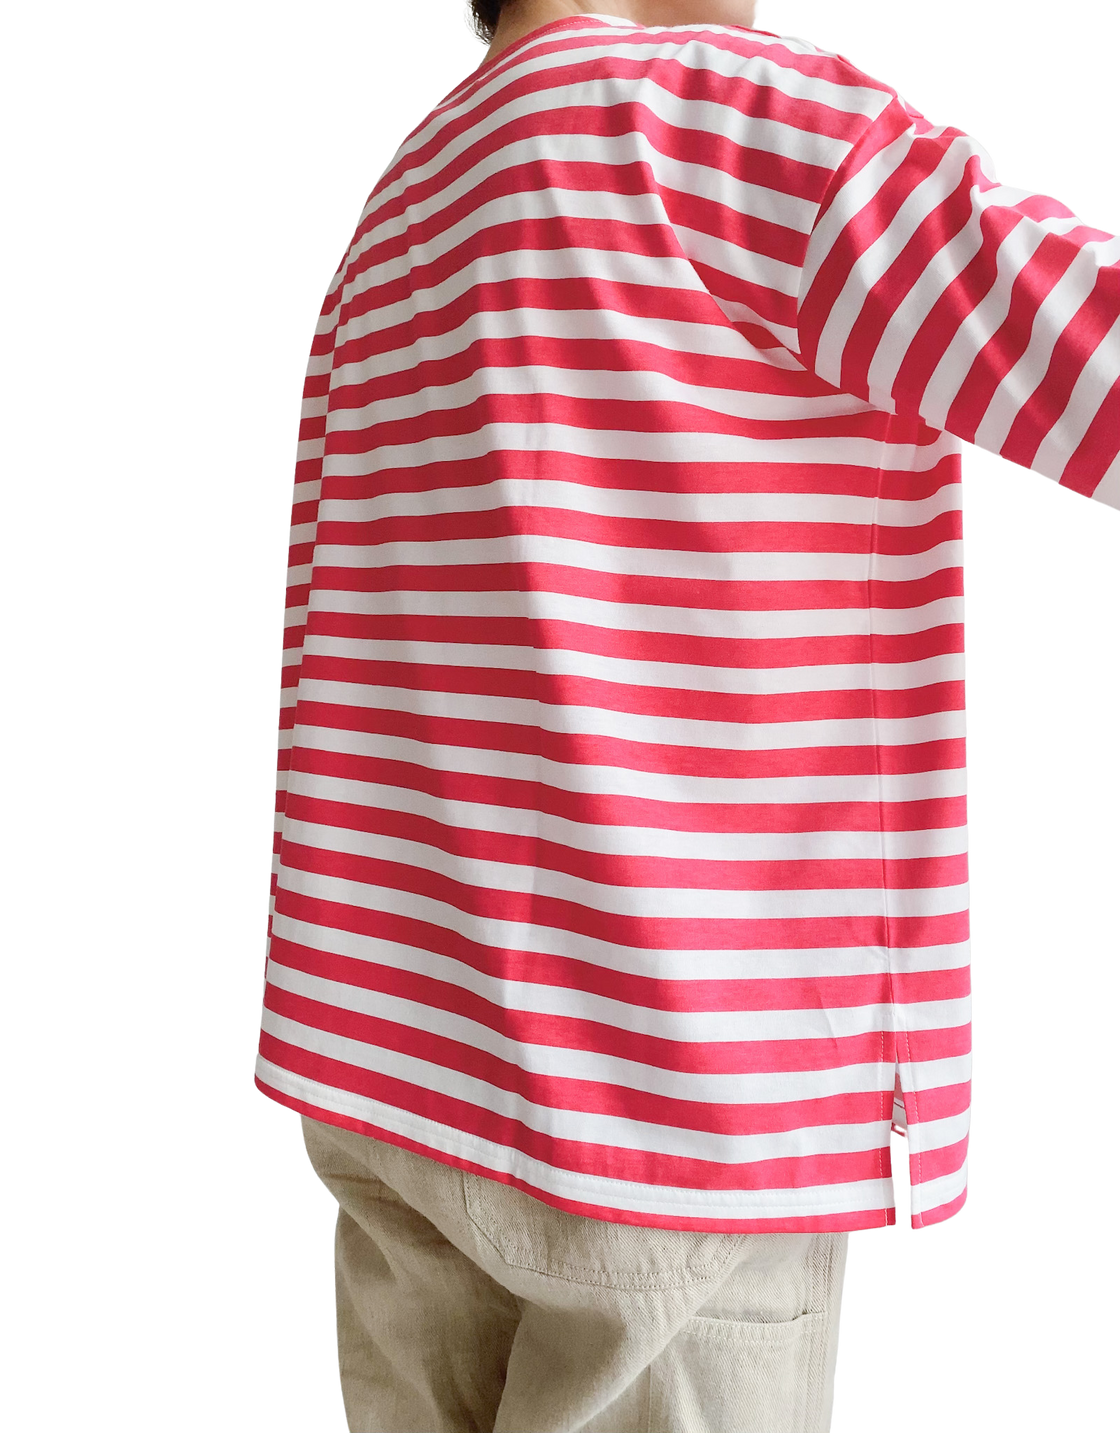 ORIGINAL PRINT BOADER WIDE PULL OVER in White-Pink